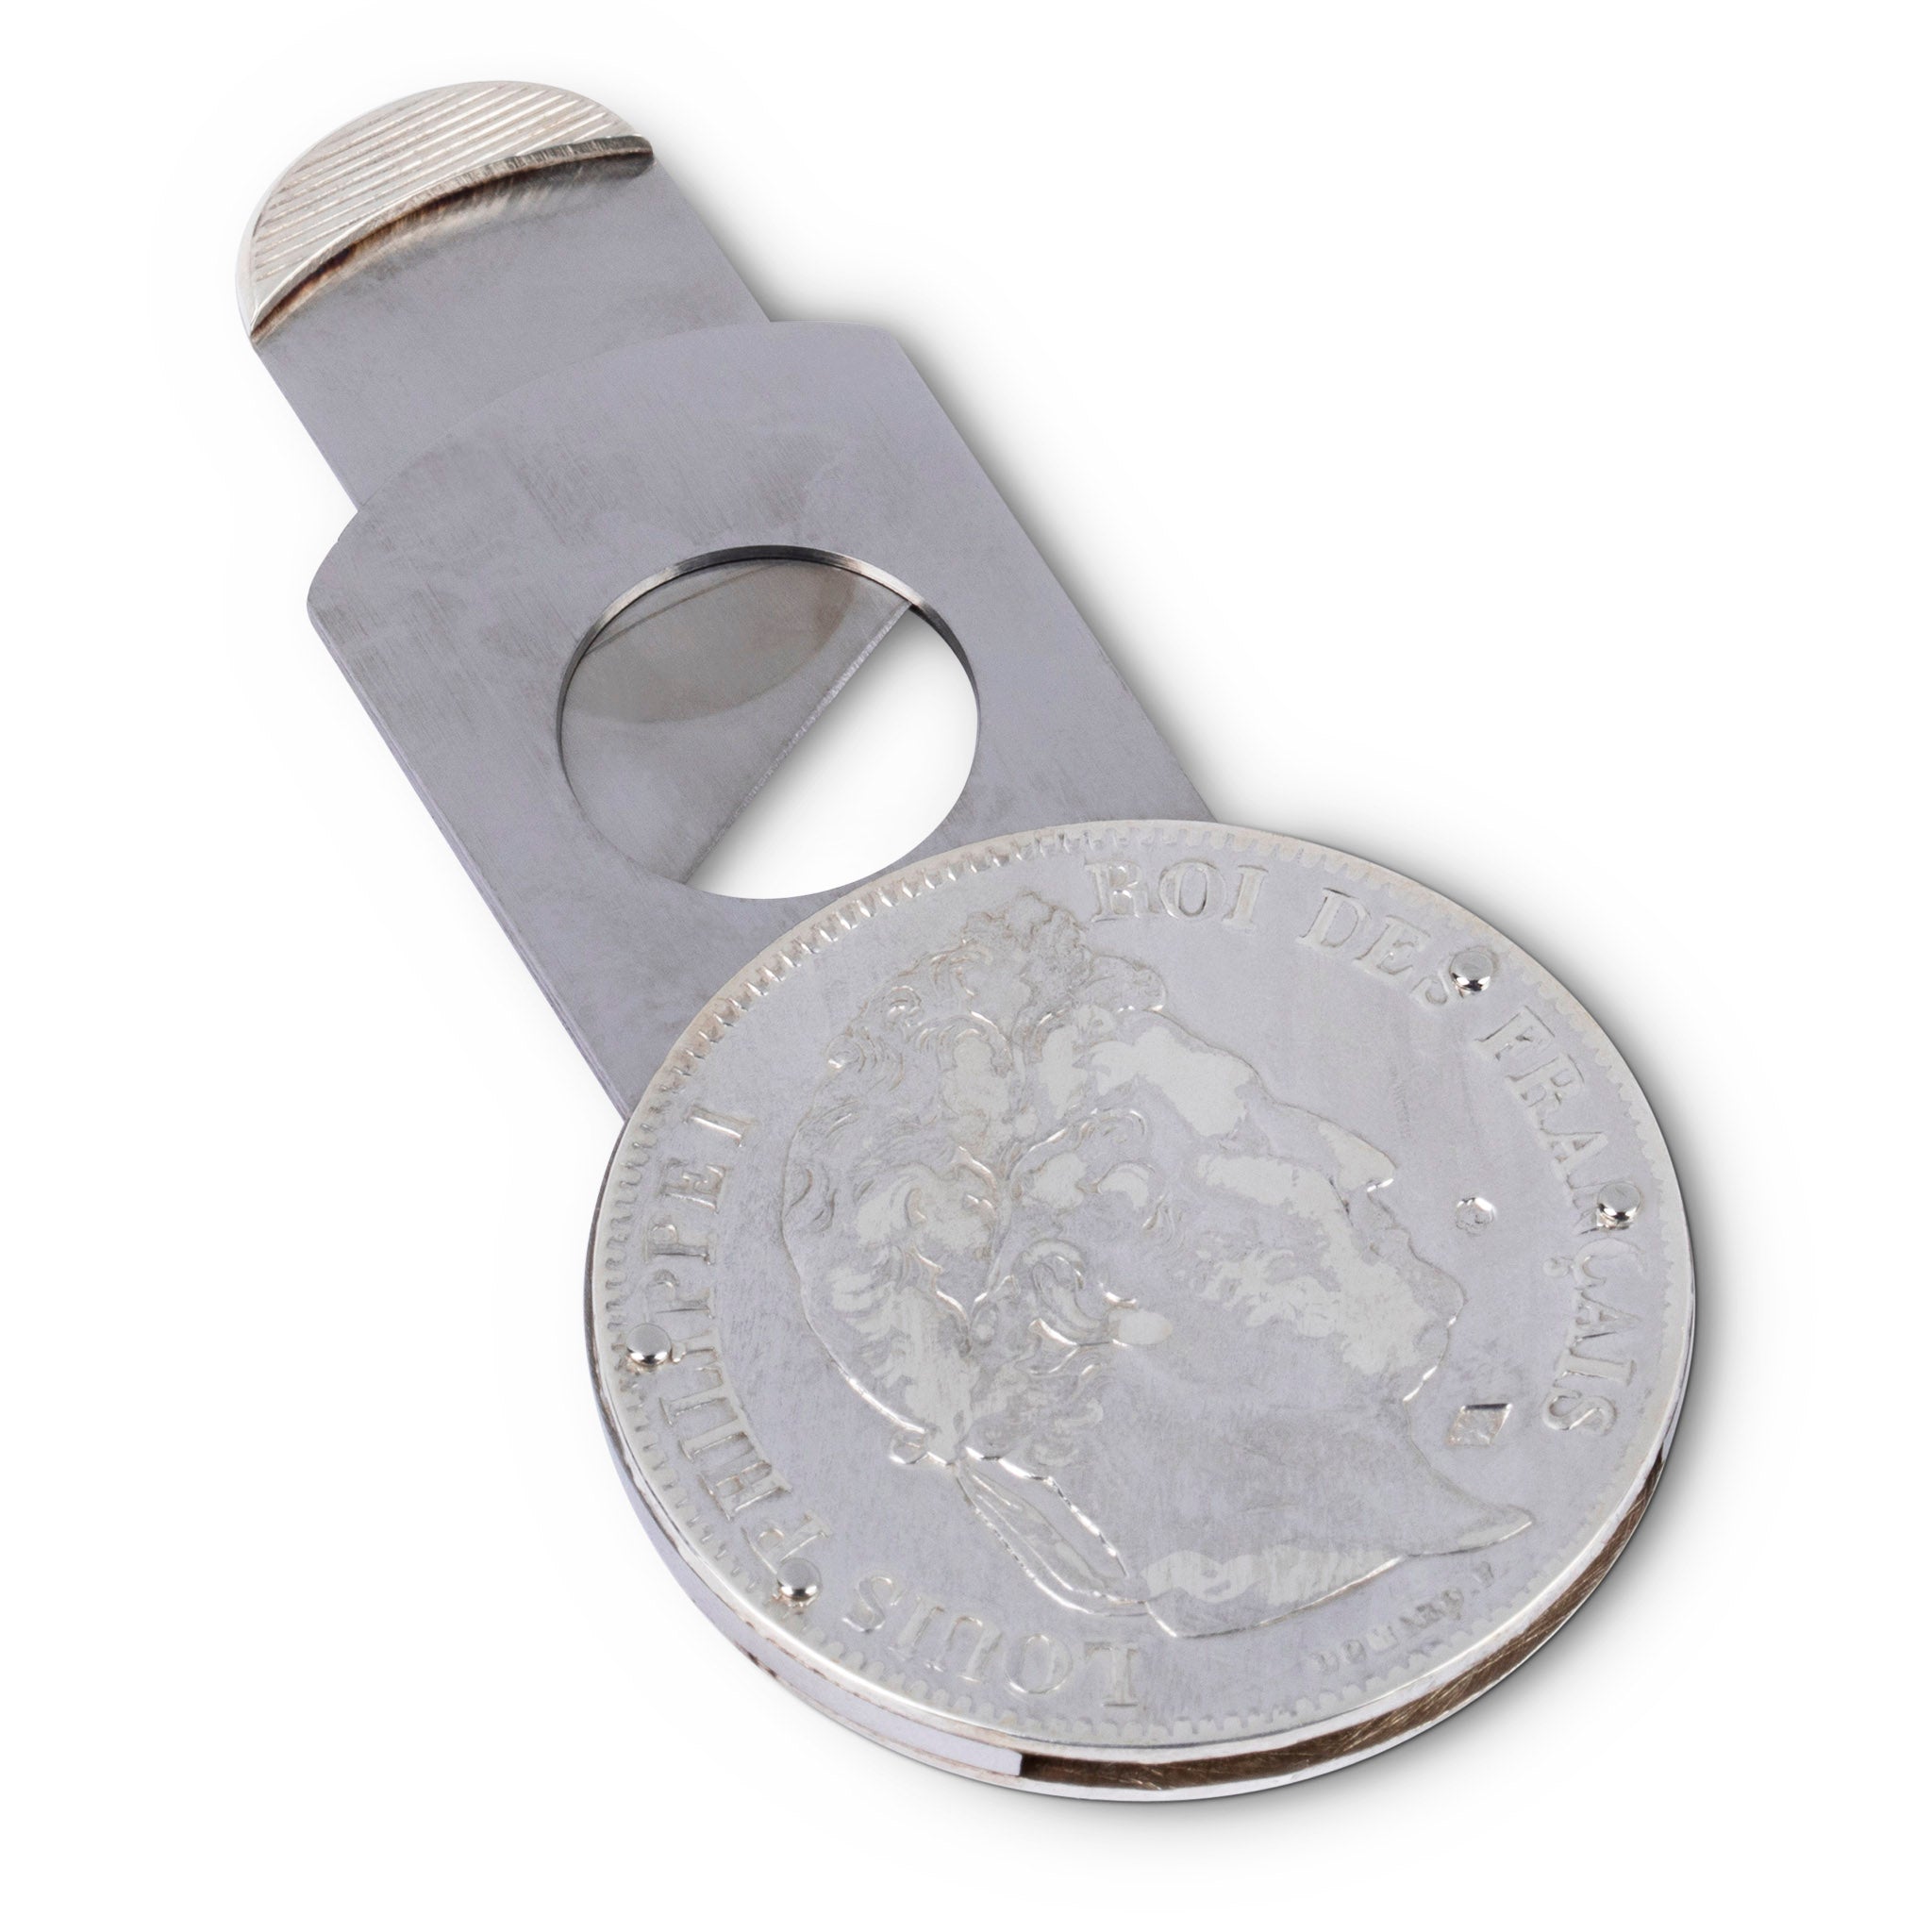 Eloi Pernet 1835 French Five Francs Coin Cigar Cutter